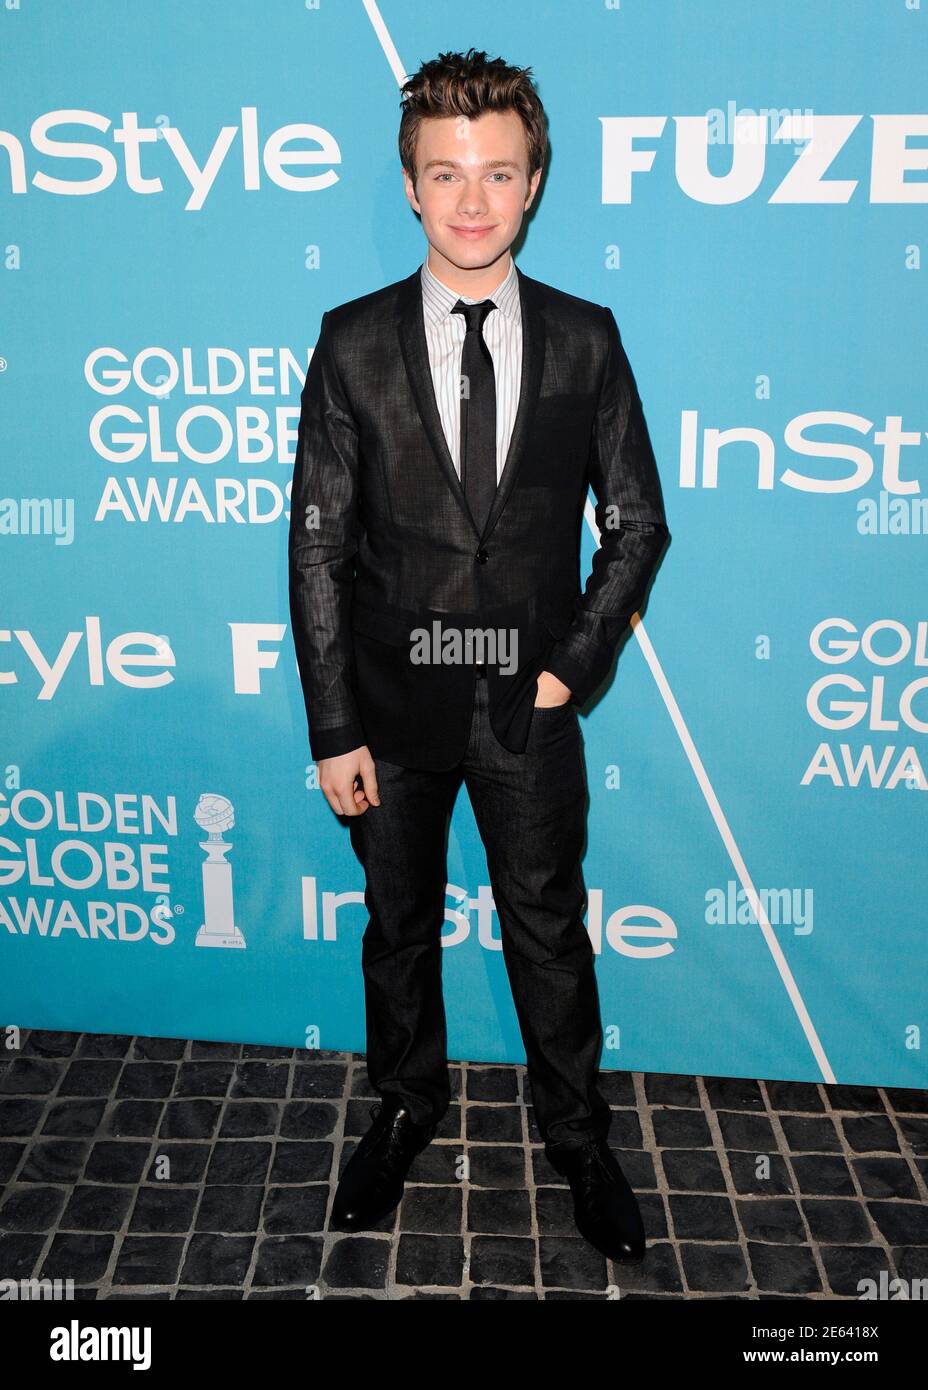 Actor Chris Colfer arrives at the Hollywood Foreign Press Association's 'A Night of Firsts' in celebration of the 2012 Golden Globe Award Season in West Hollywood, California December 8, 2011. REUTERS/Gus Ruelas (UNITED STATES - Tags: ENTERTAINMENT) Stock Photo